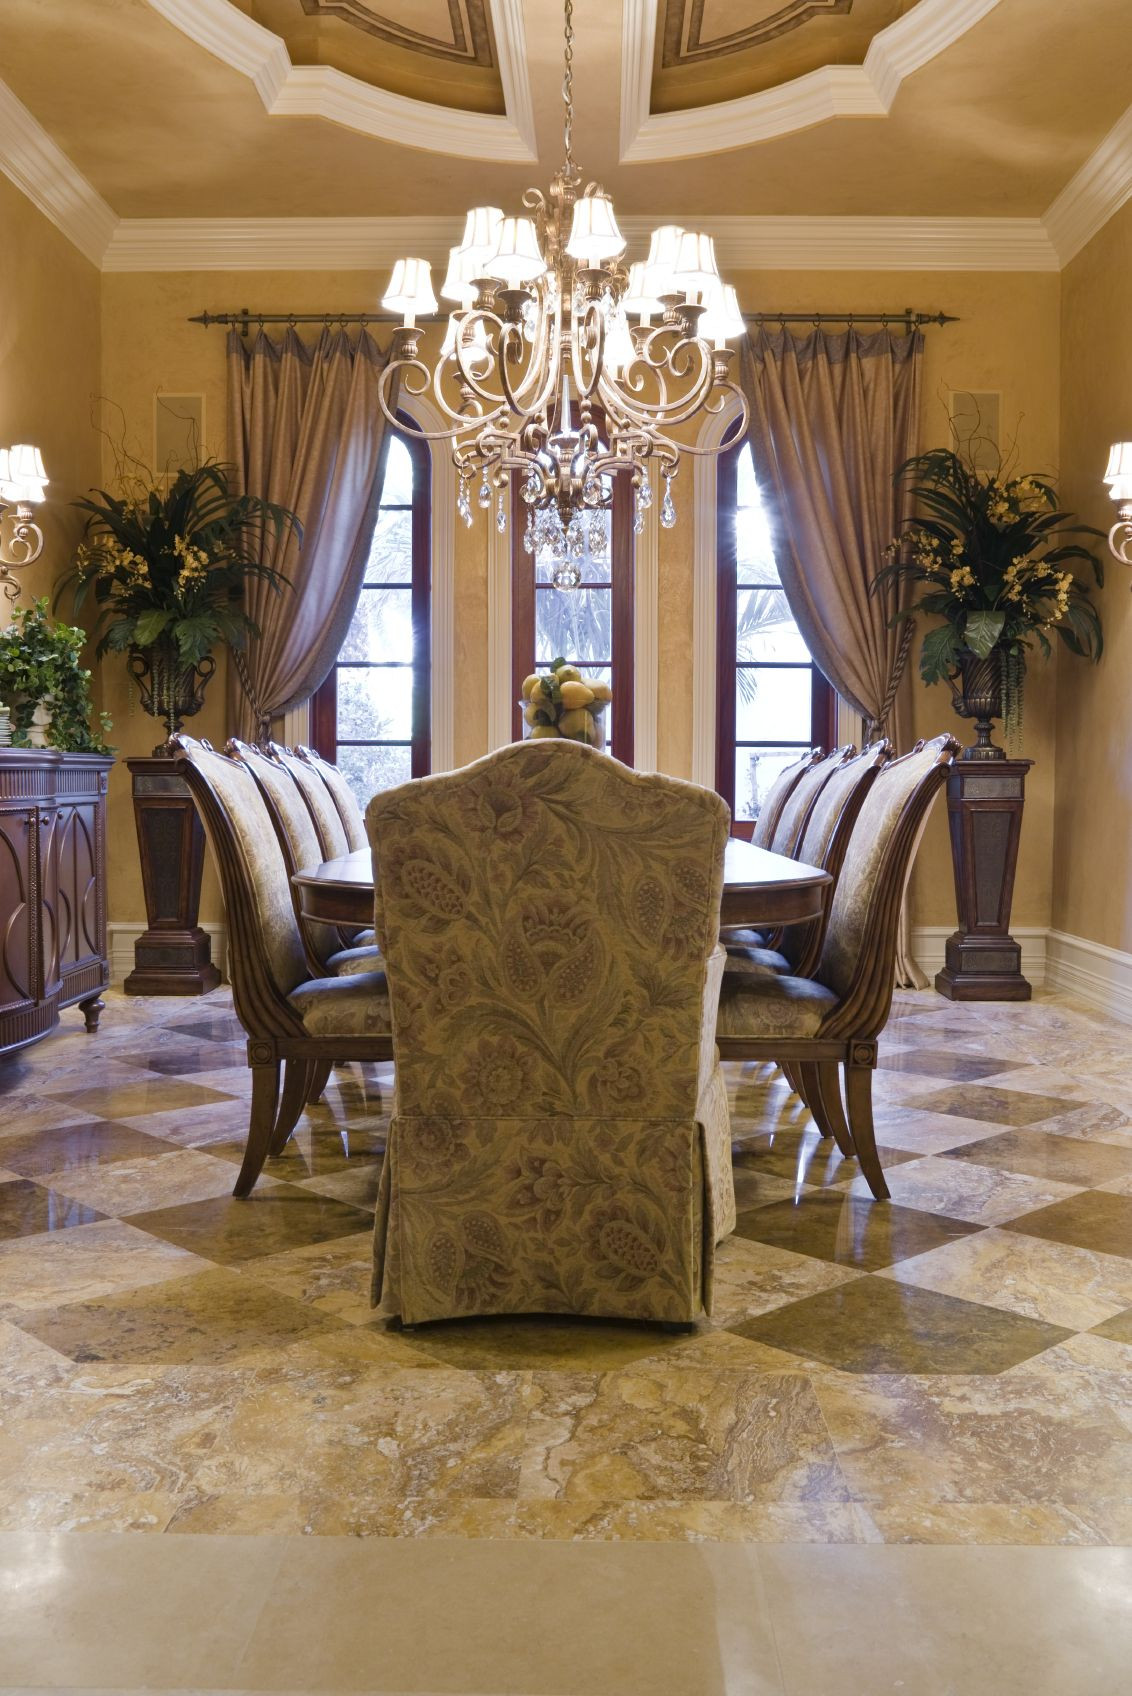 Formal Kitchen Curtains
 Luxurious dining room amazing curtains and ceiling